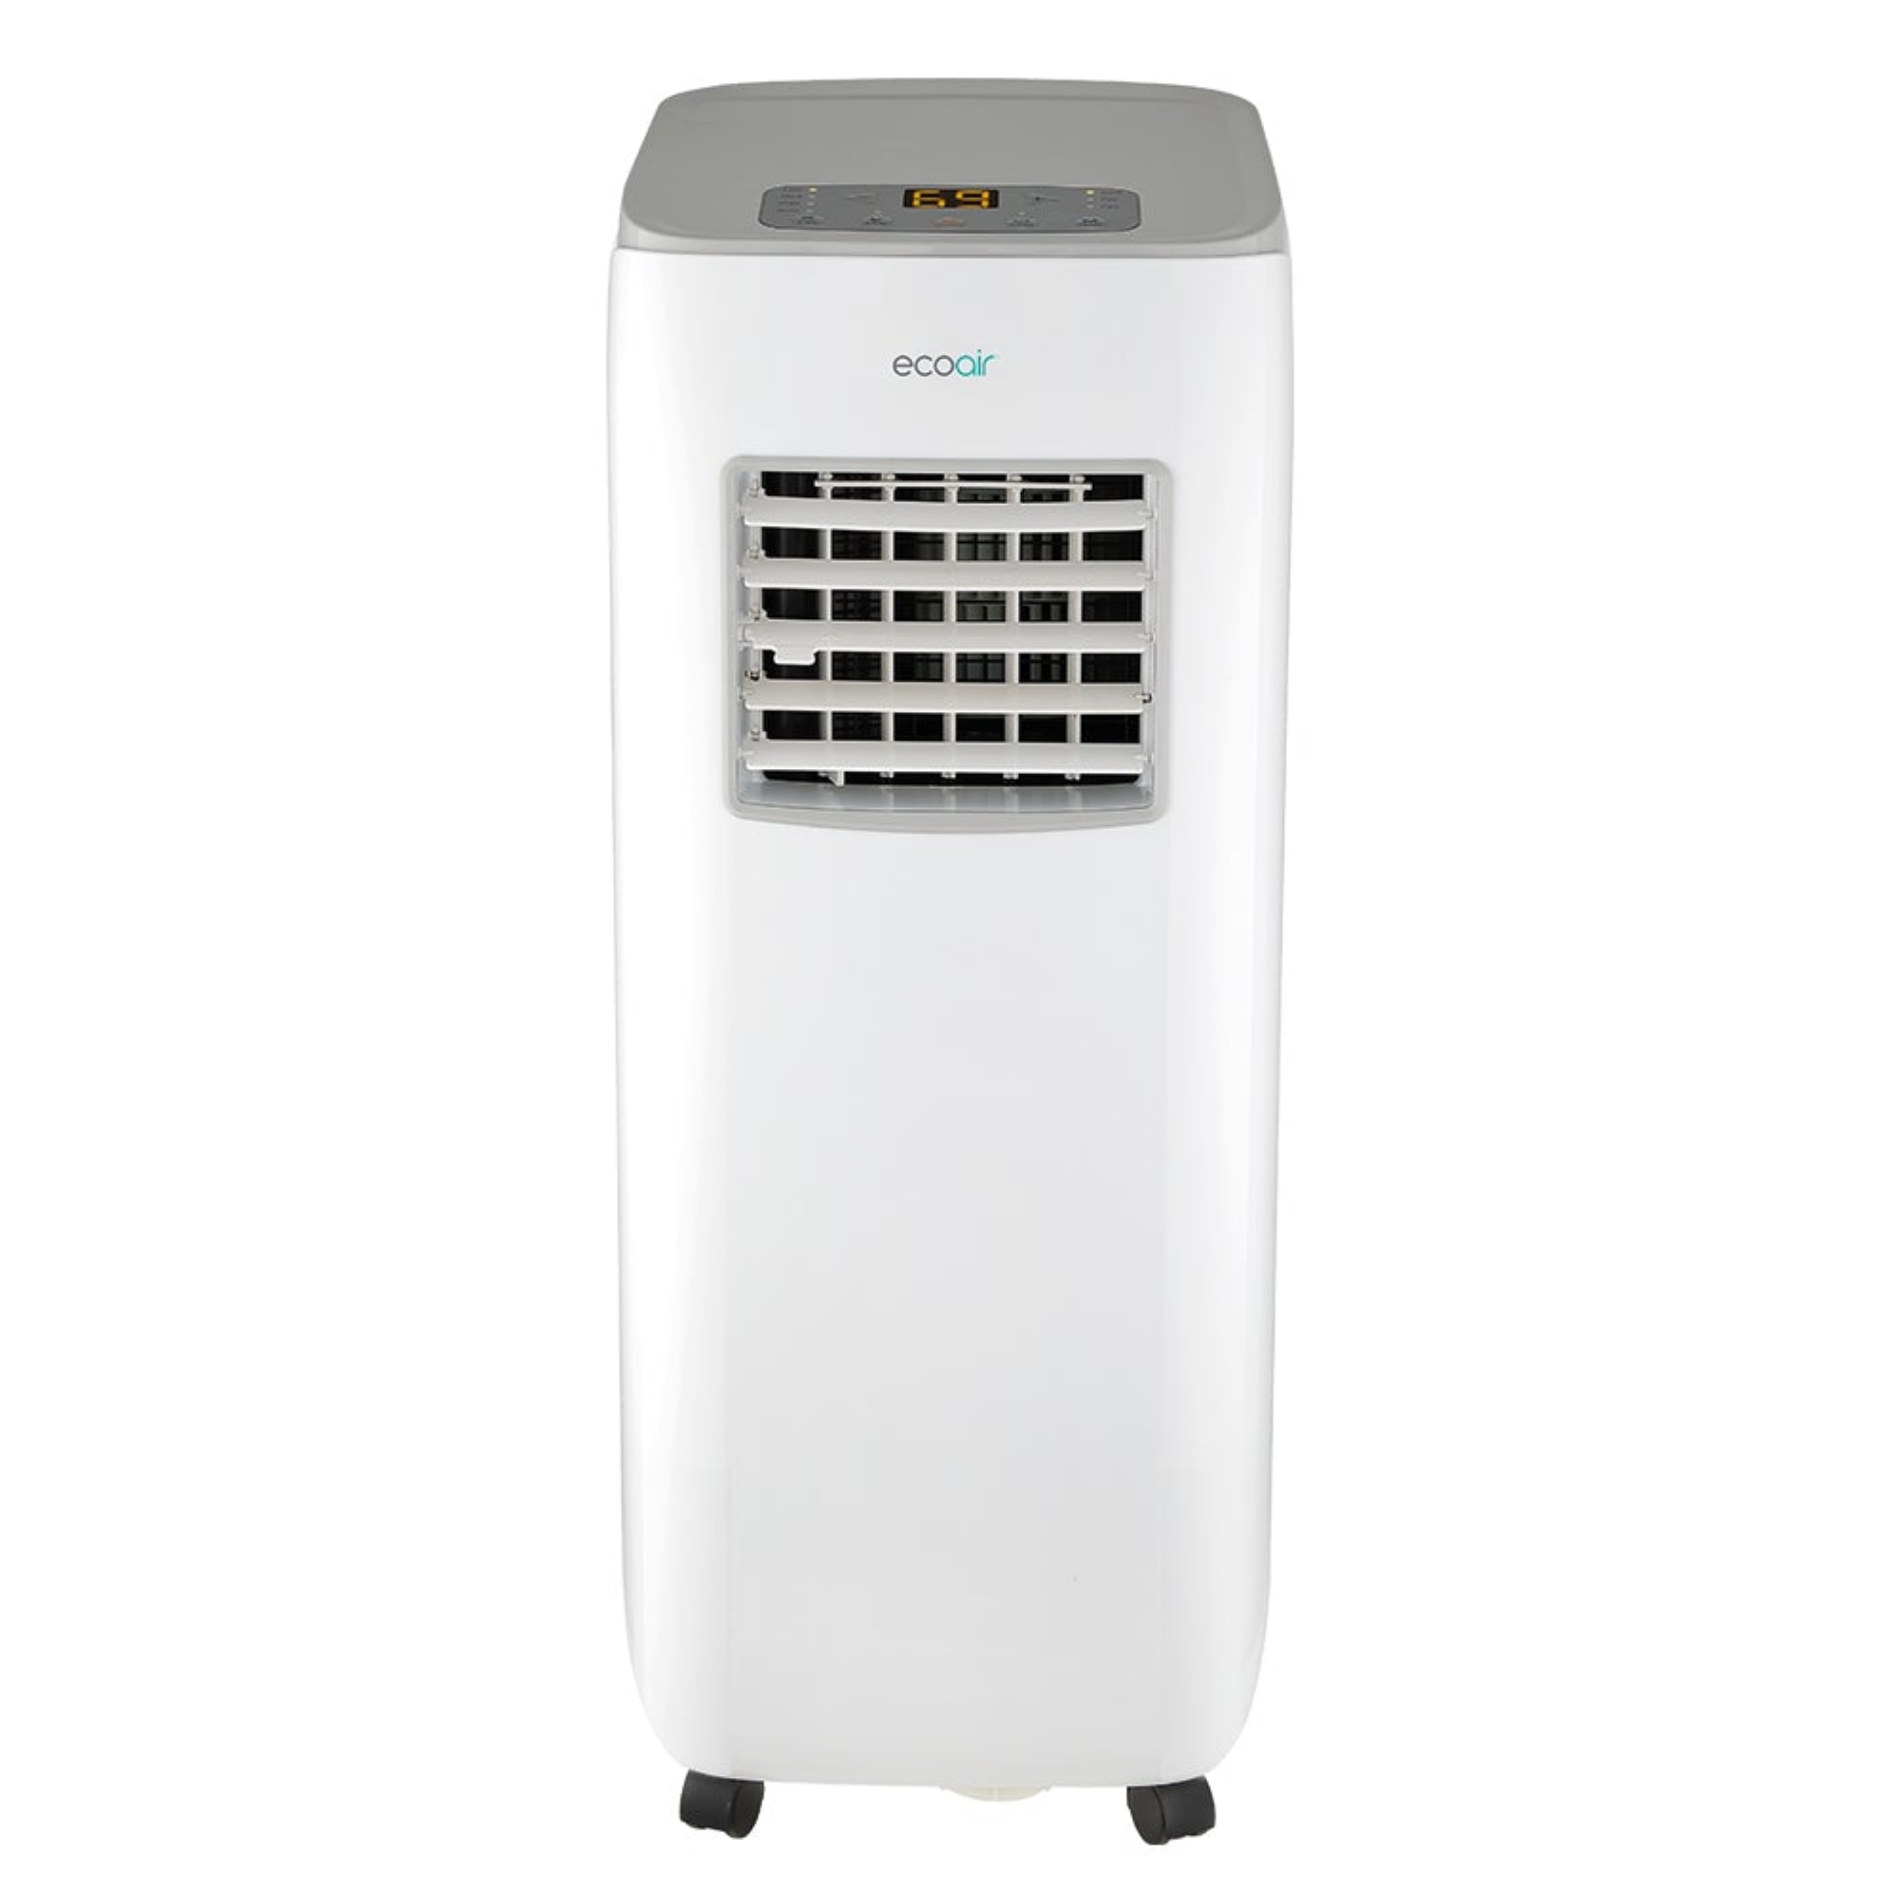 Eco Air Crystal R32 2.8kW Portable Air Conditioning Unit main